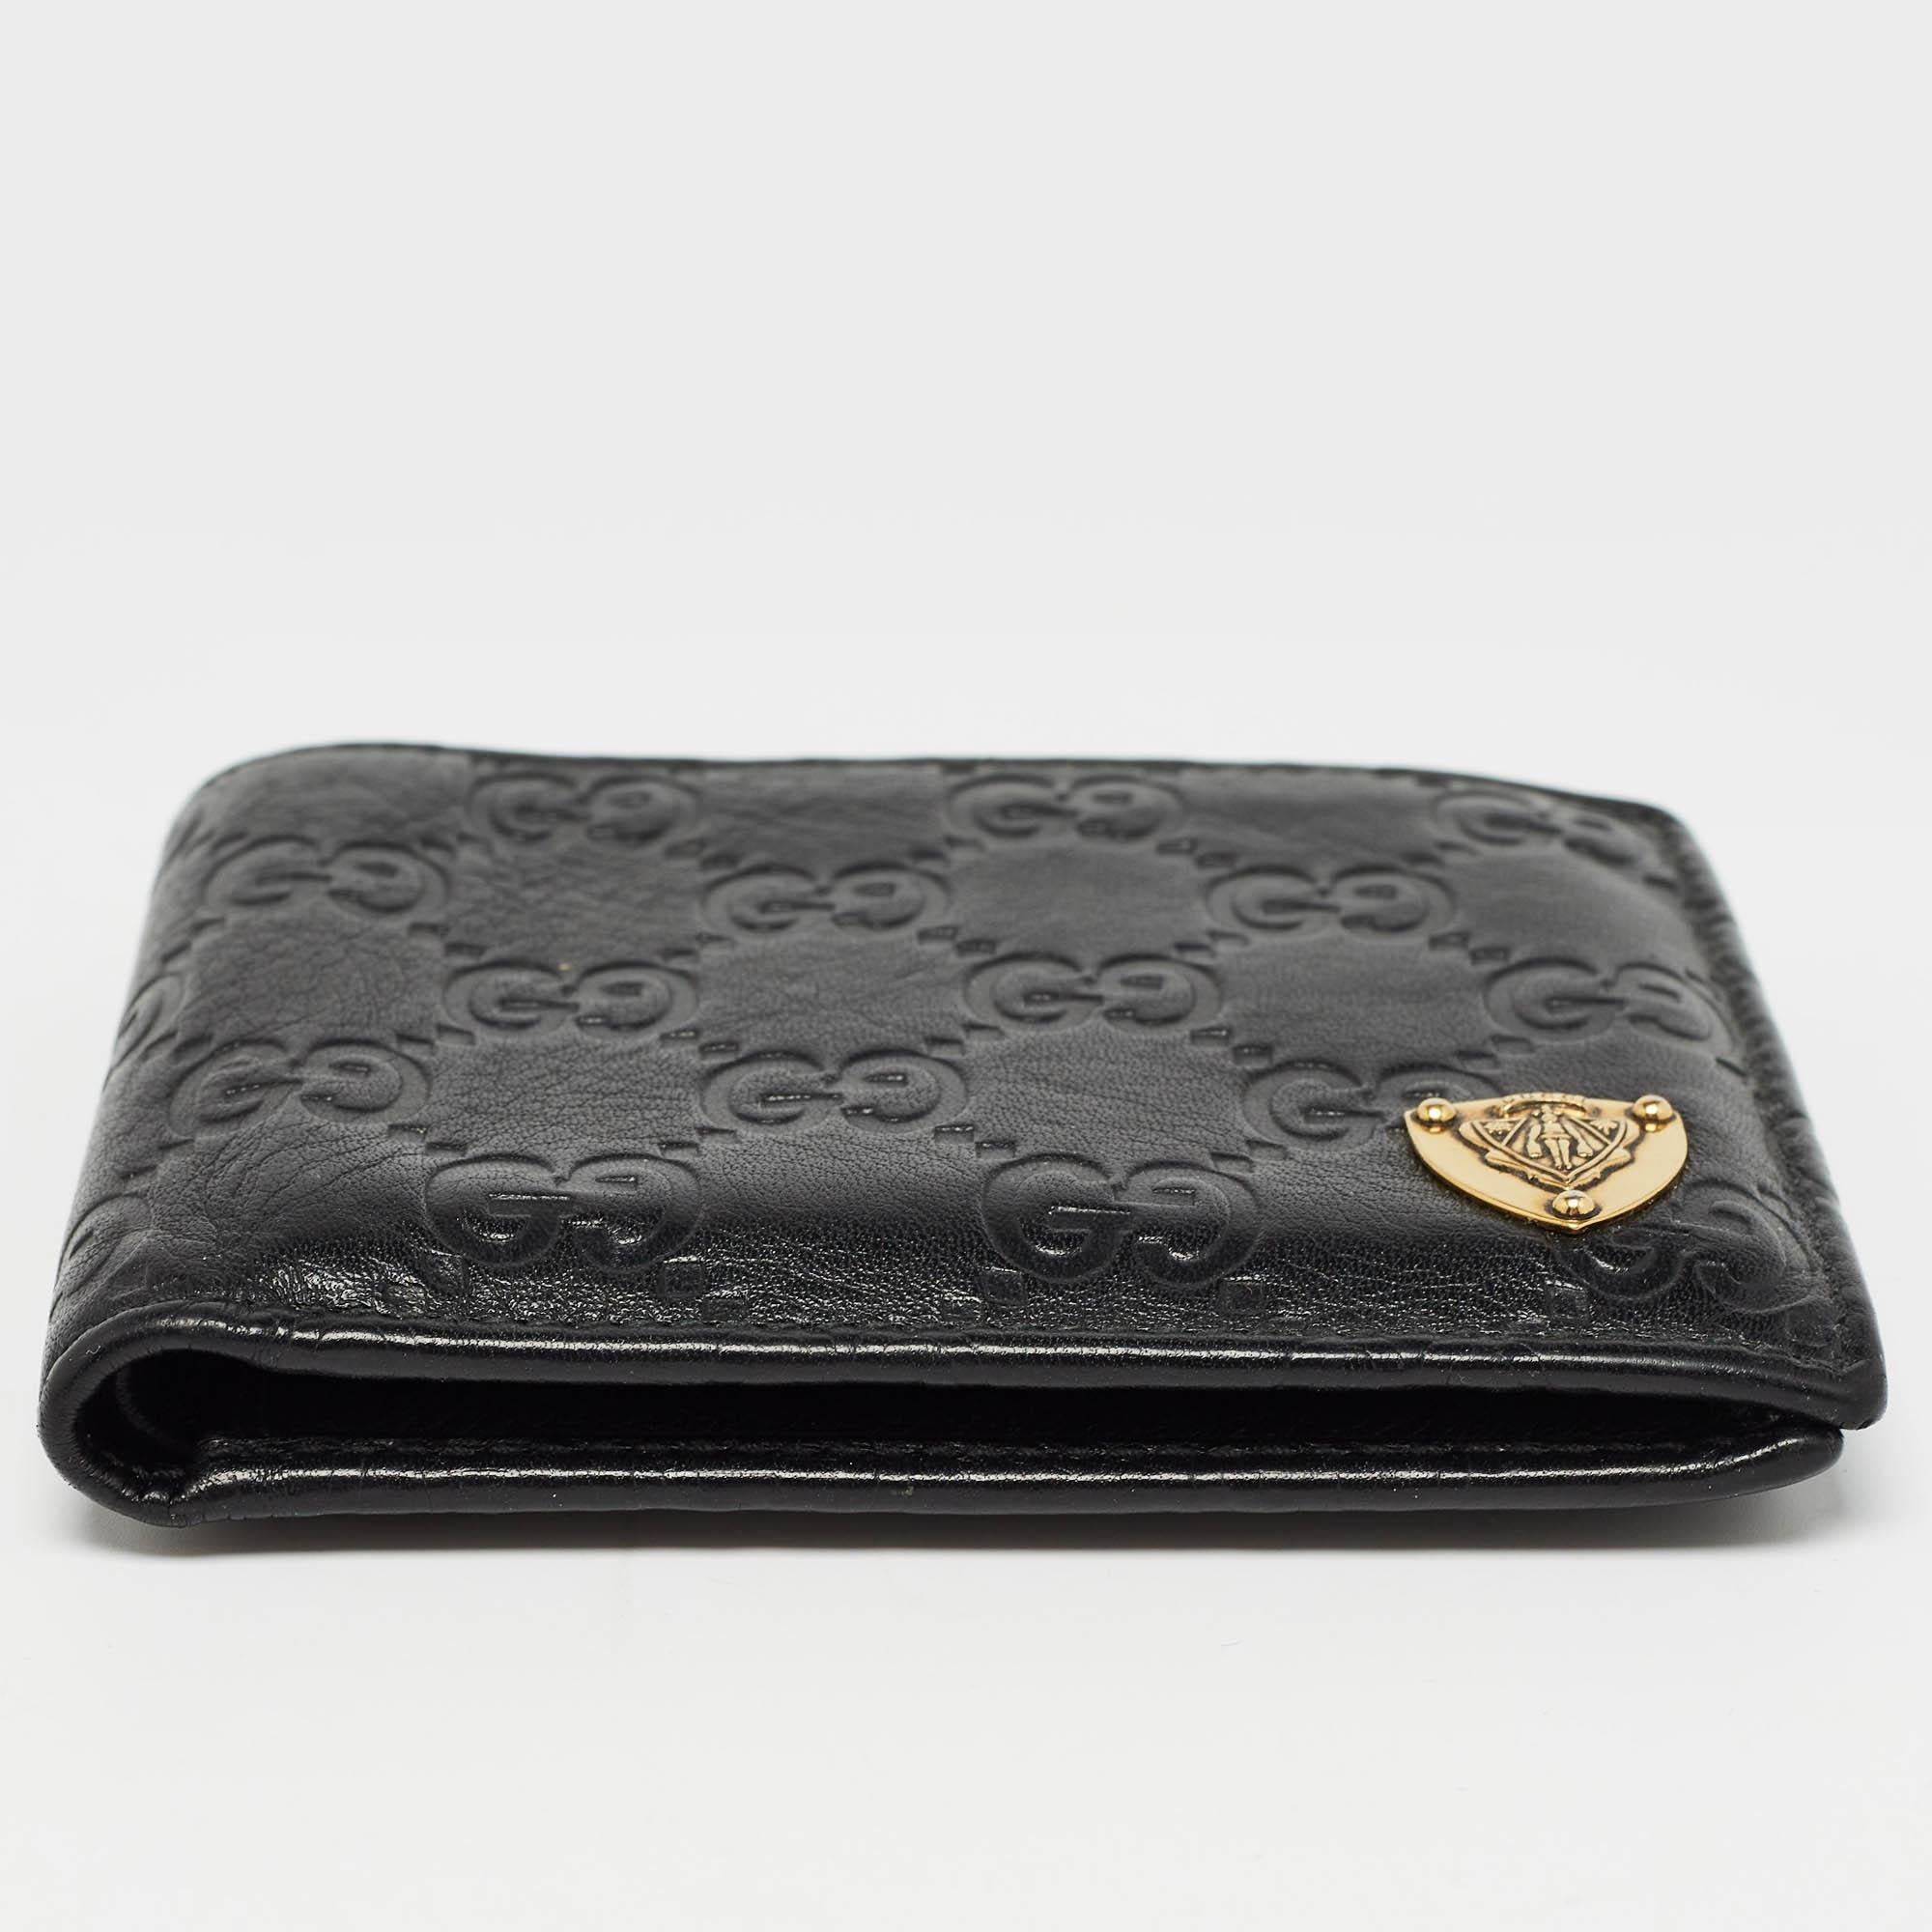 Gucci Black Guccissima Leather Crest Bifold Wallet For Sale 3